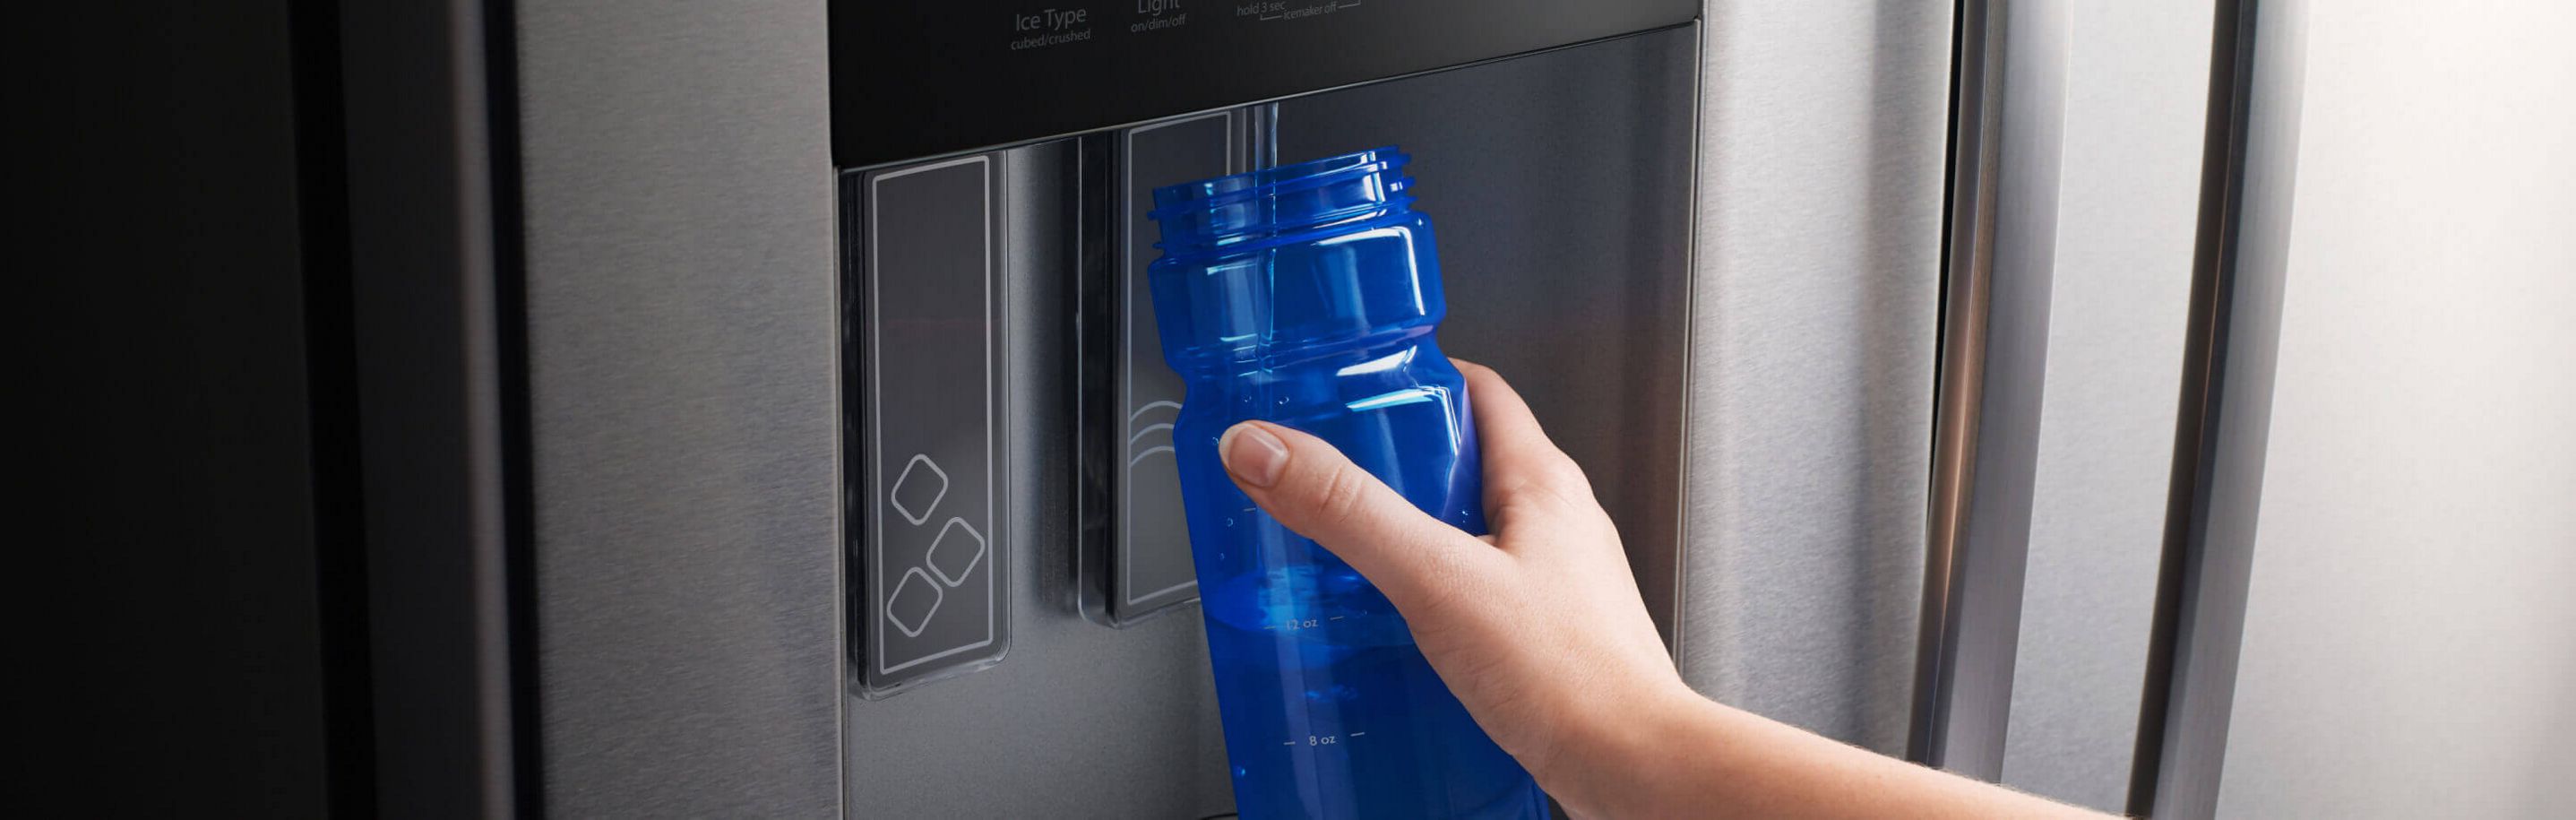 Person filling a water bottle from a refrigerator water dispenser